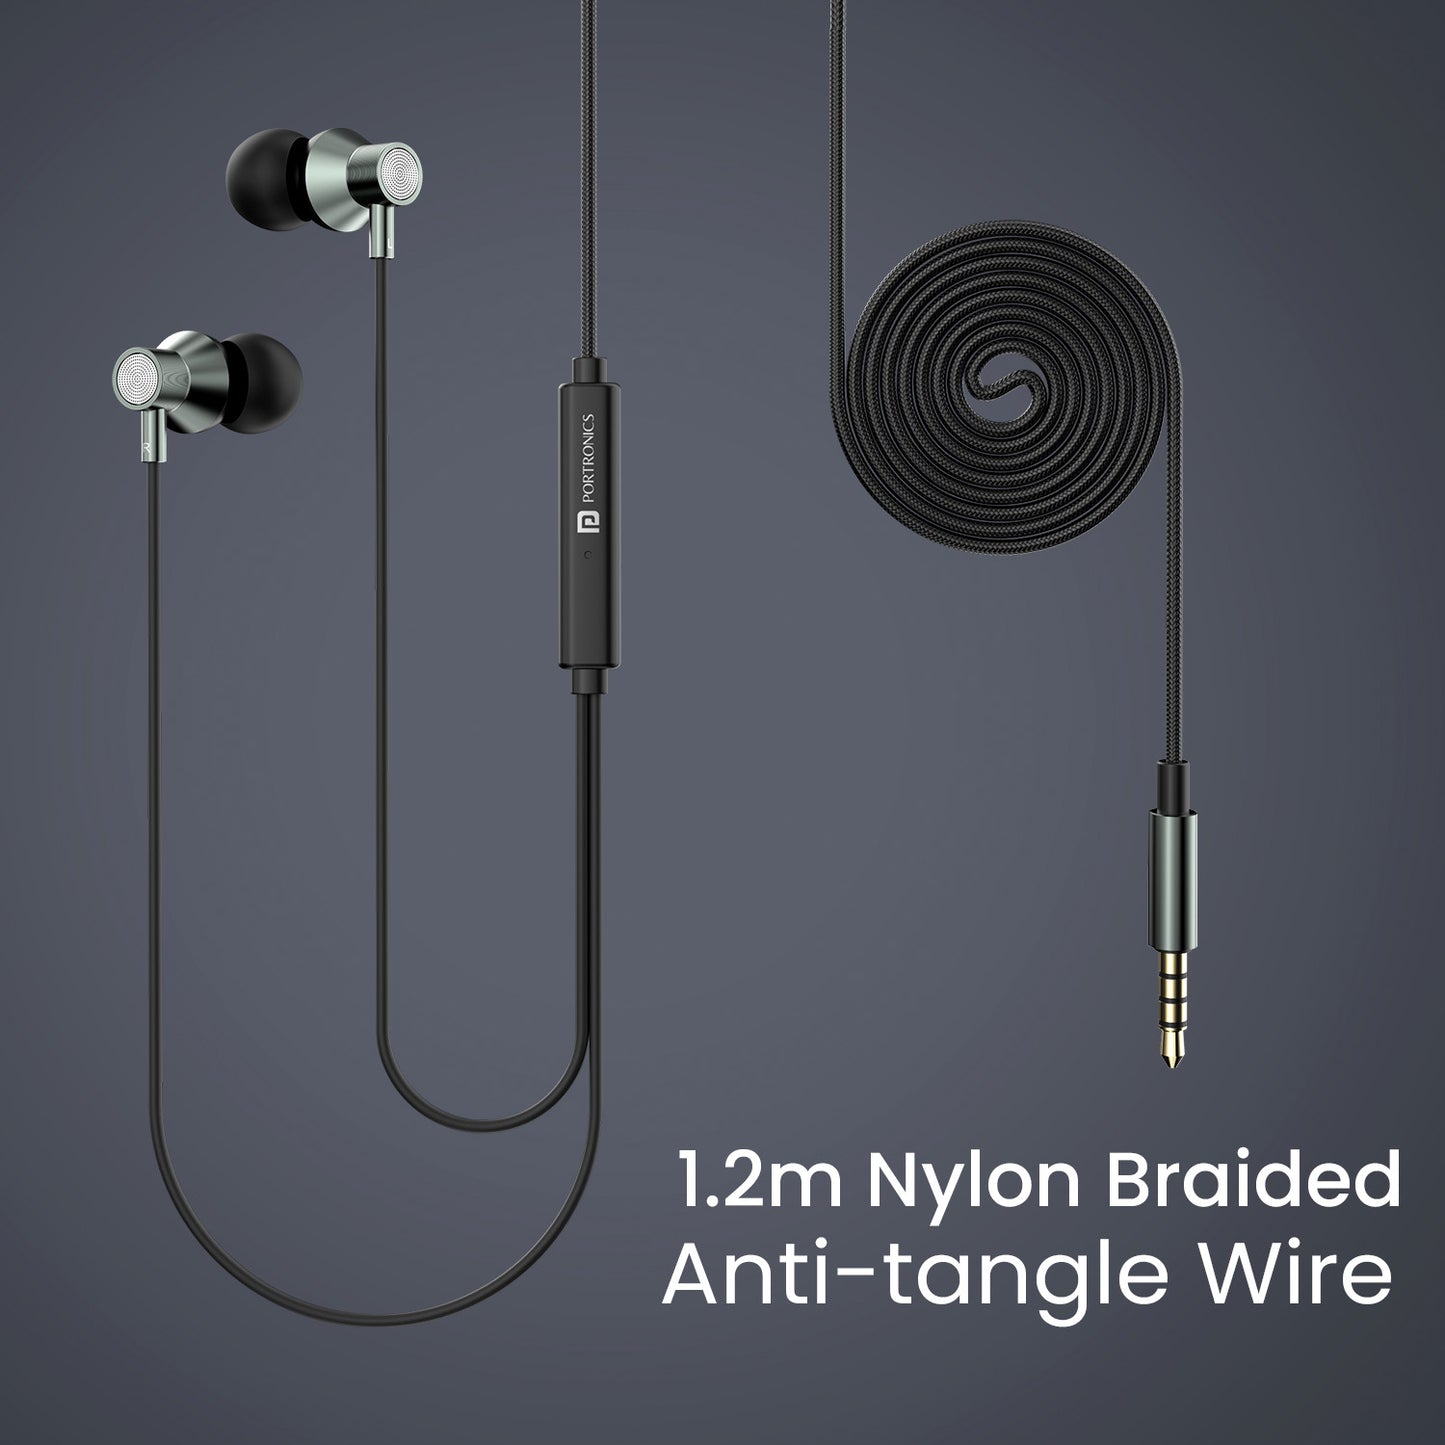 Black Portronics conch tune A wired headset earphone comes with 1.2m anti-tangle wire